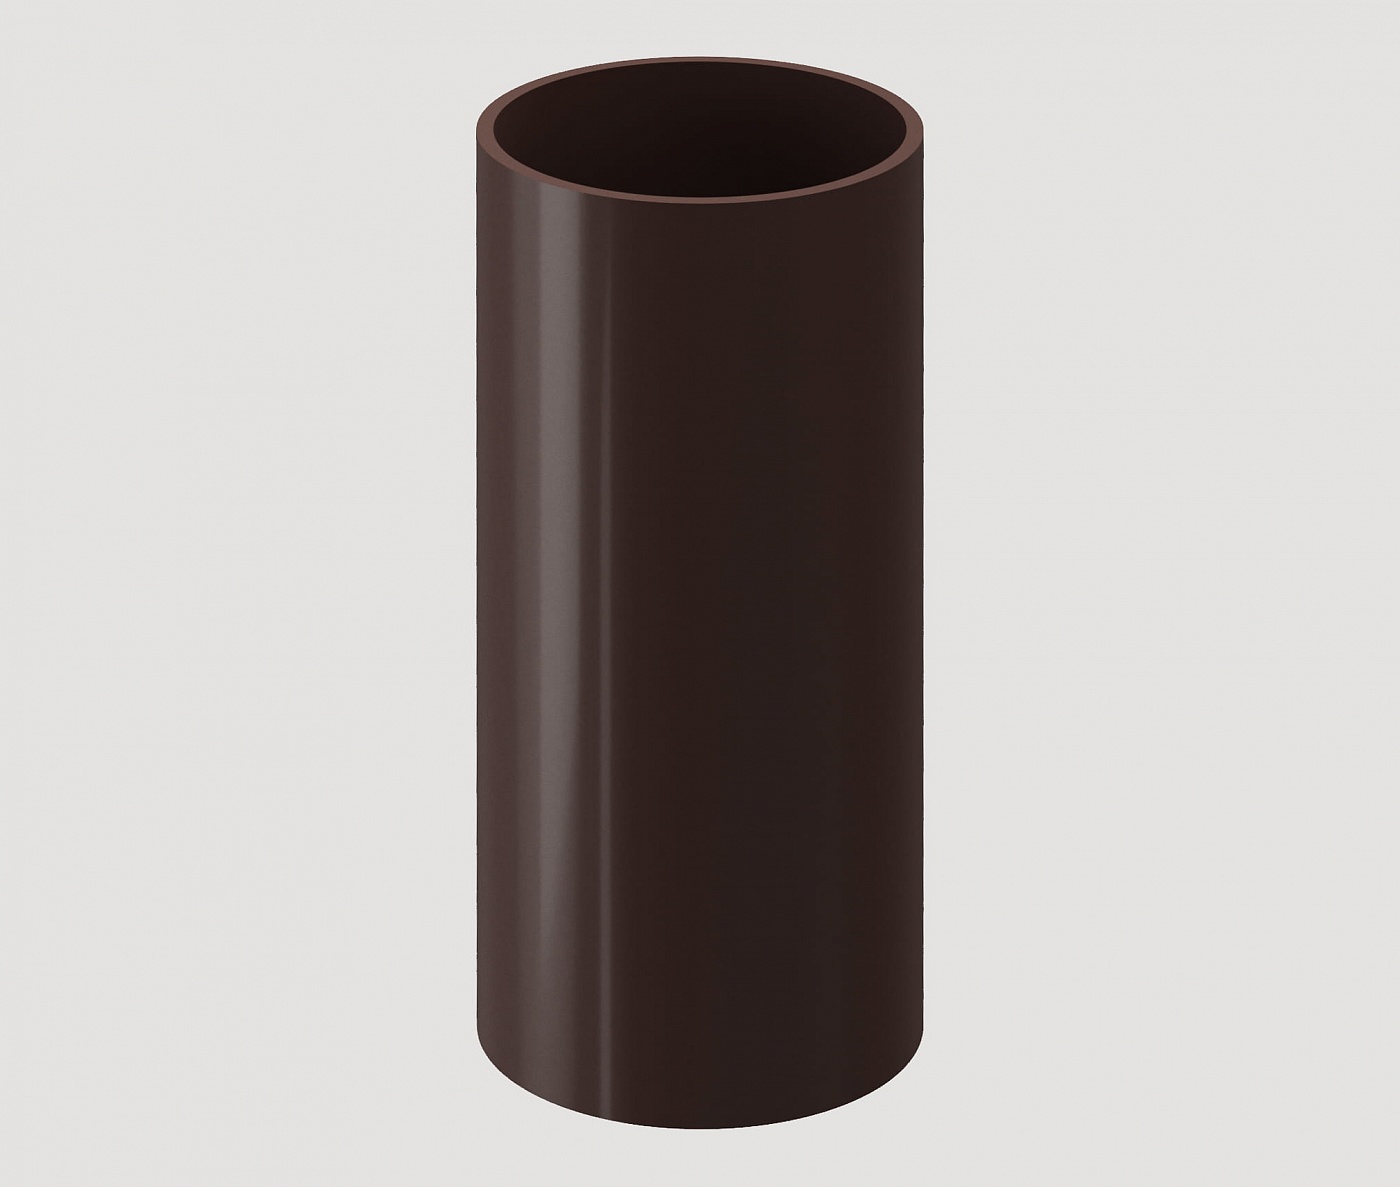 Водостоки - STANDARD SERIES Dark brown RAL 8017 - Elements of the drainage system - Pipe 2m